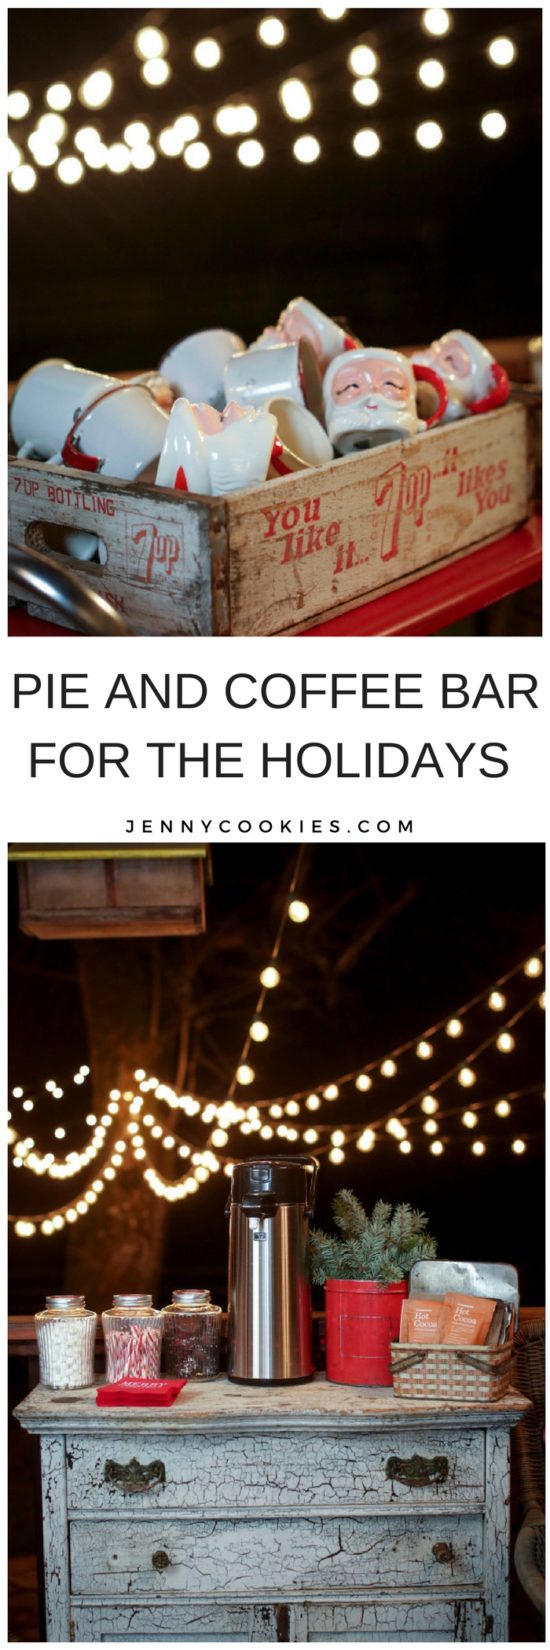 Pie and Coffee Party | holiday party ideas | Christmas party ideas | party ideas for the holidays | party ideas for Christmas | hosting a holiday party || JennyCookies.com #holidayparty #christmasparty 